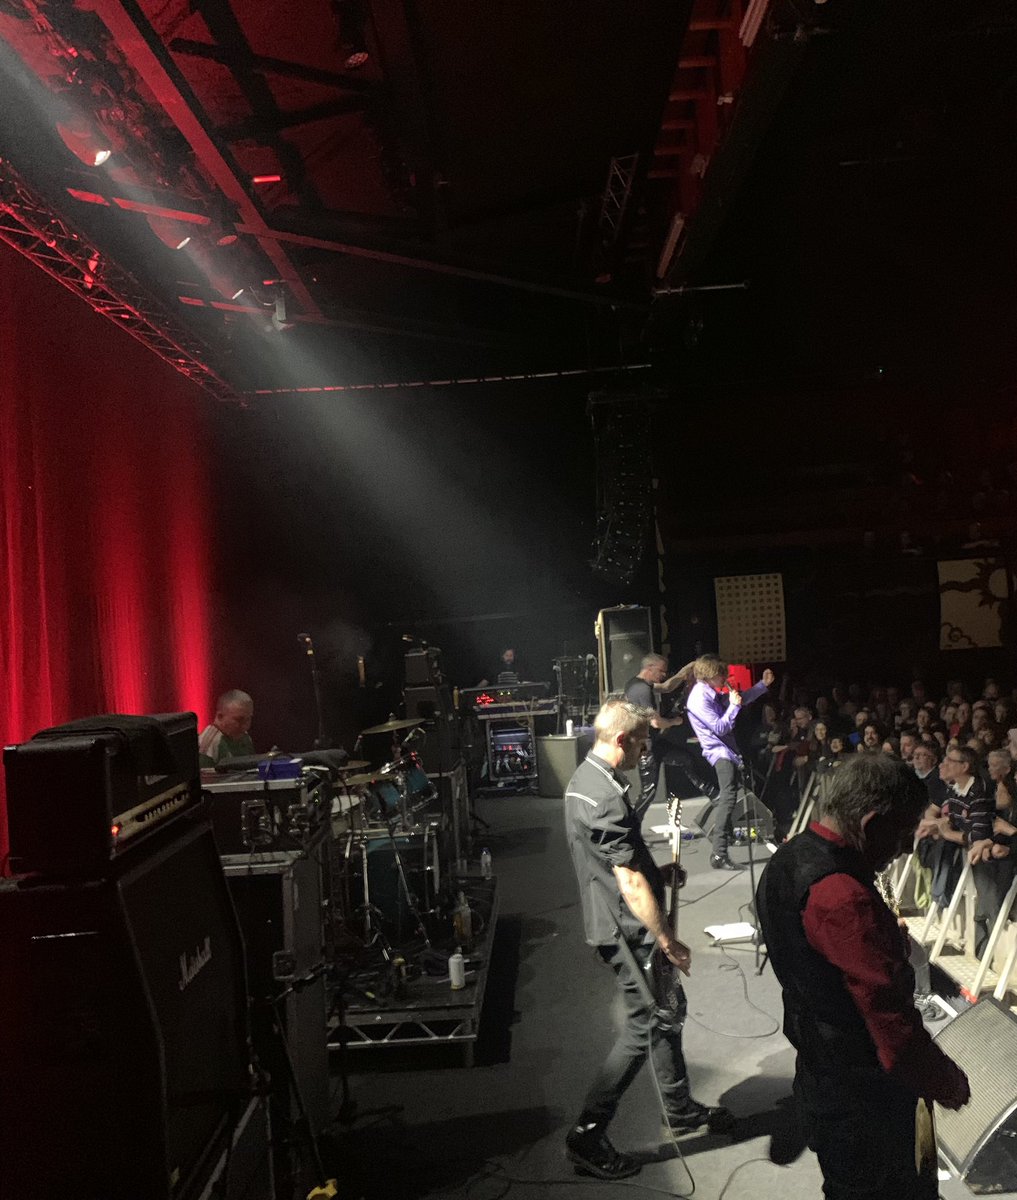 @tonysatelle If we’re posting pictures of Ian Olney, here he is being signaled out by God last night for his bass playing. @powerofdreams30 @Vicar_Street @sultans_of_ping